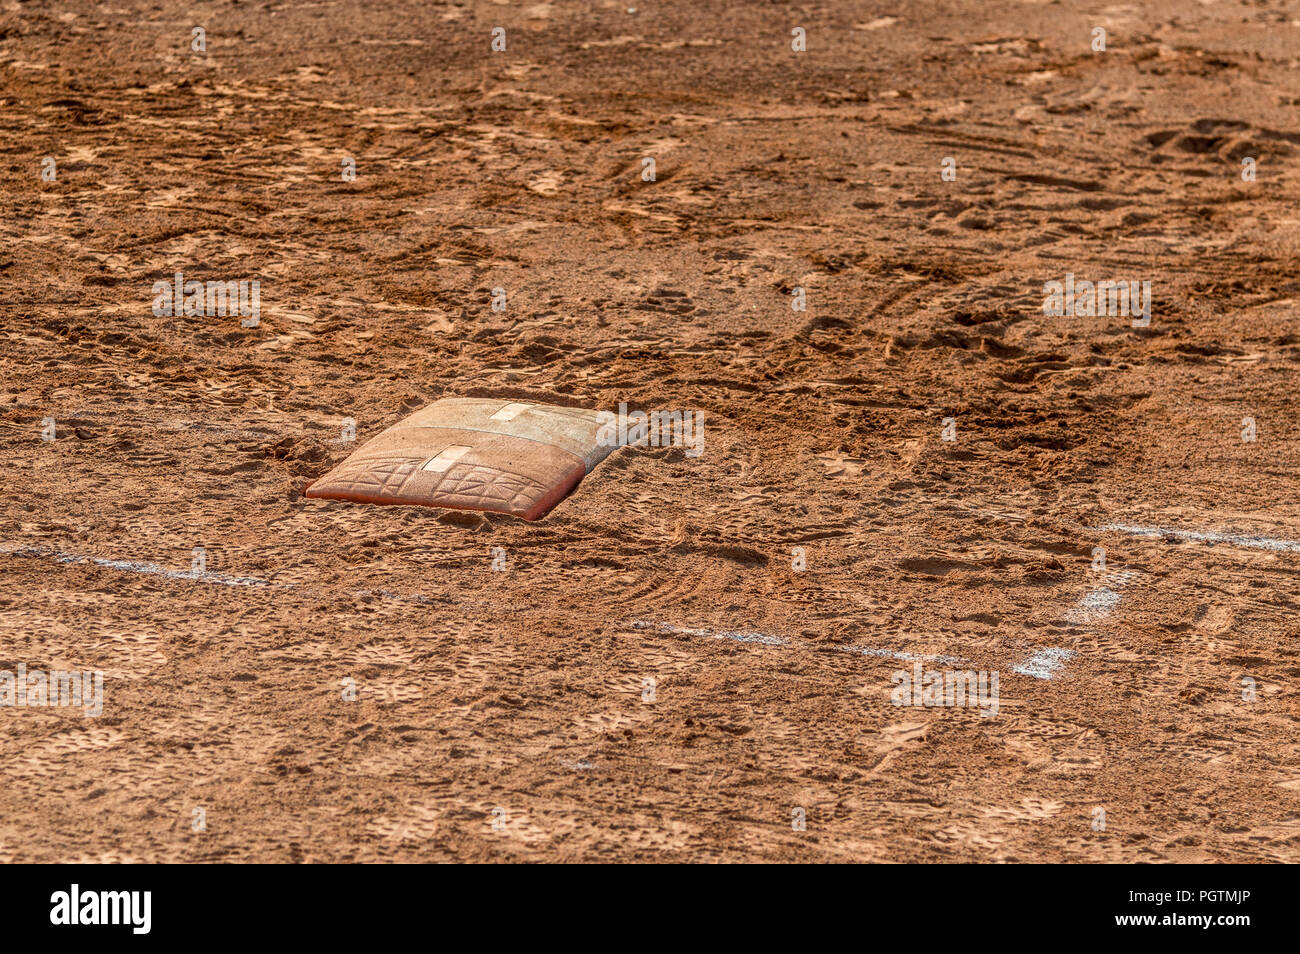 Detail of a home plate in a baseball (softball) dusty field, with copyspace Stock Photo